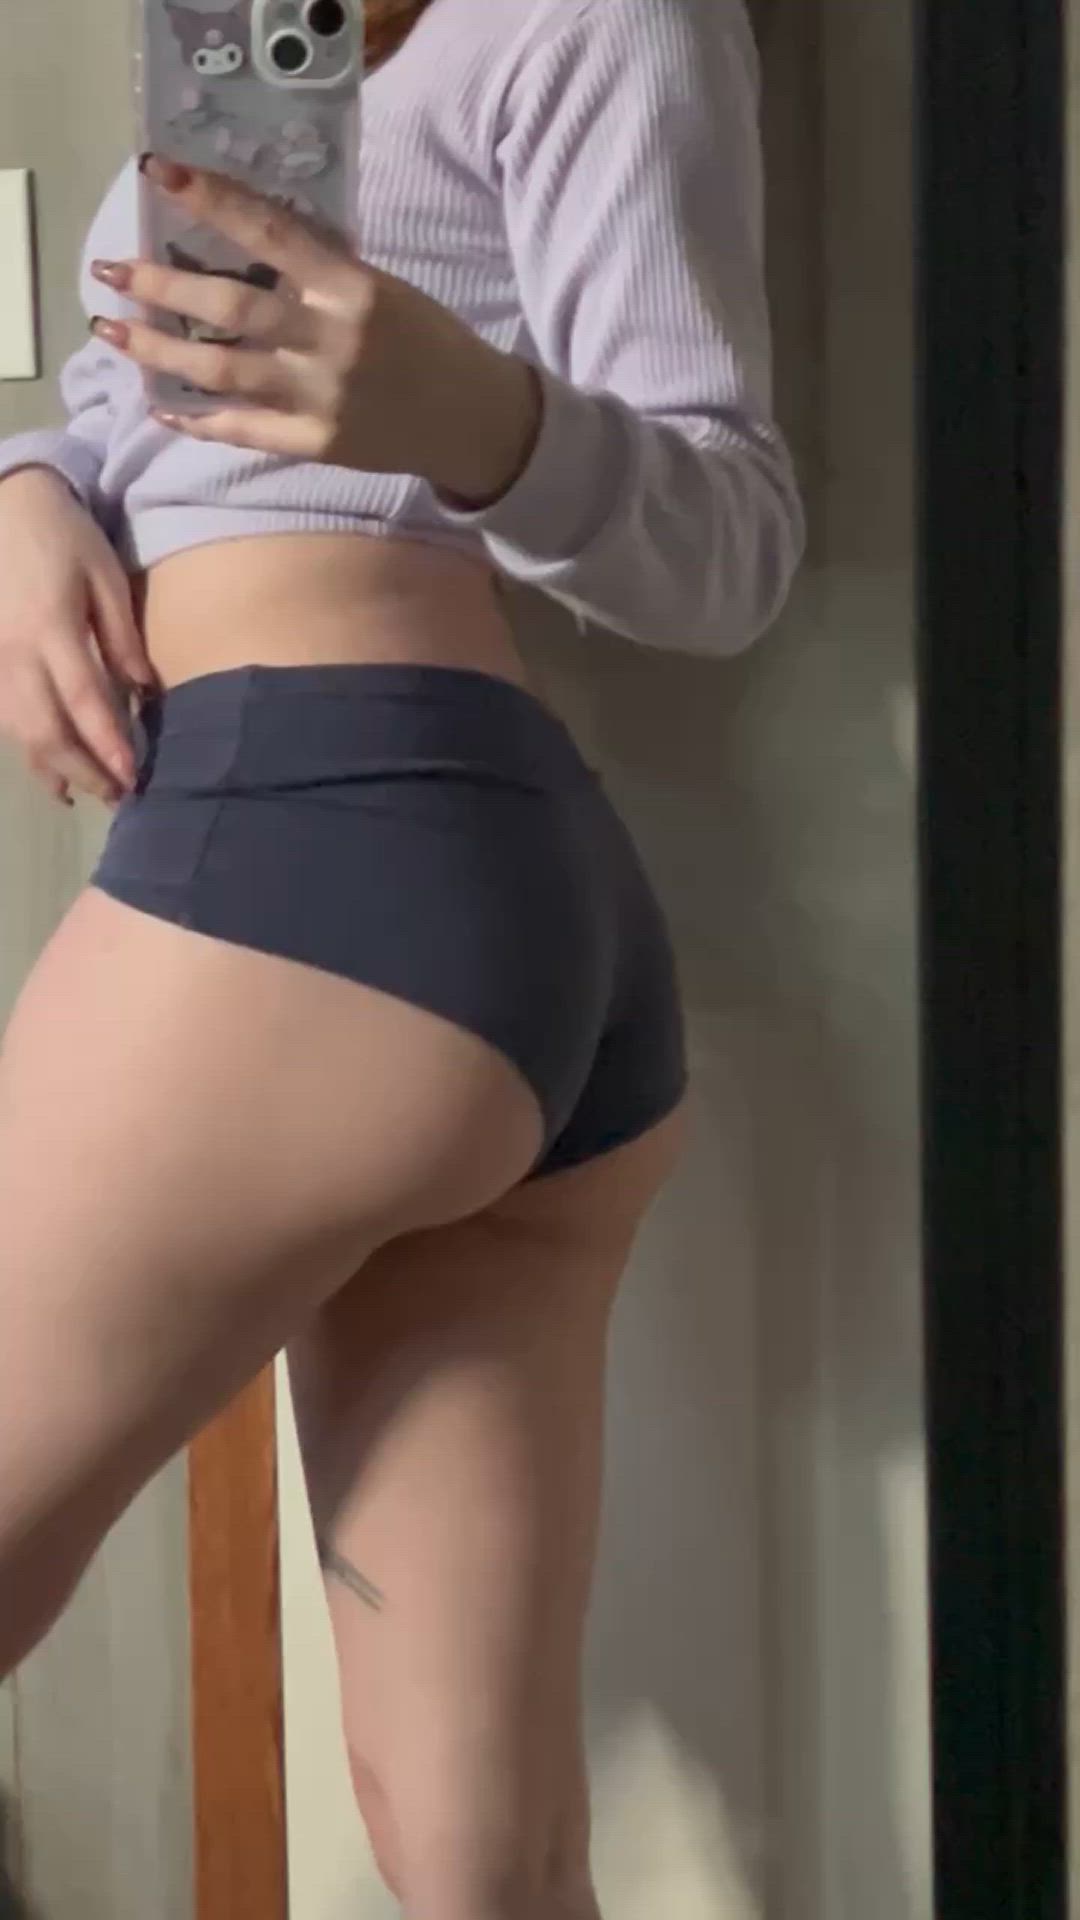 Ass porn video with onlyfans model aylaxcollins <strong>@aylaxcollins</strong>